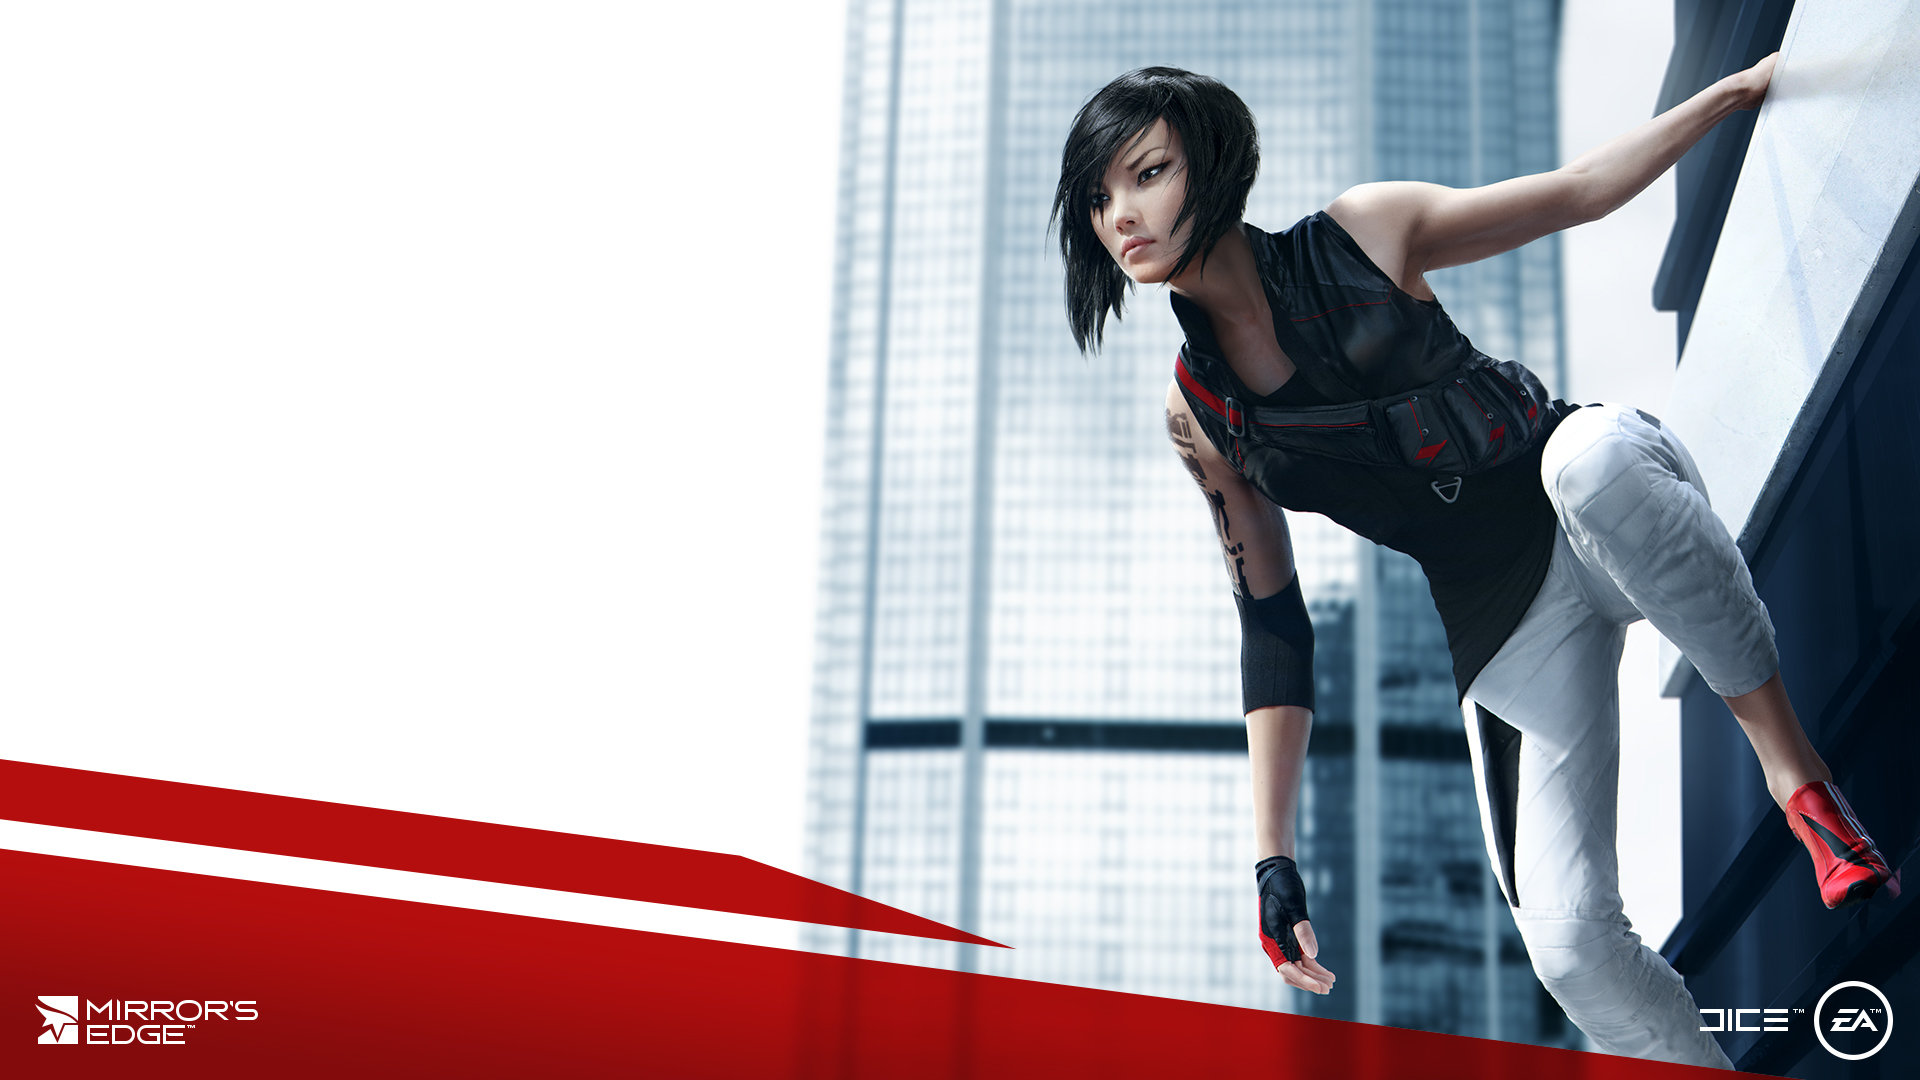 Best Mirror's Edge Catalyst wallpaper ID:219495 for High Resolution full hd 1920x1080 computer